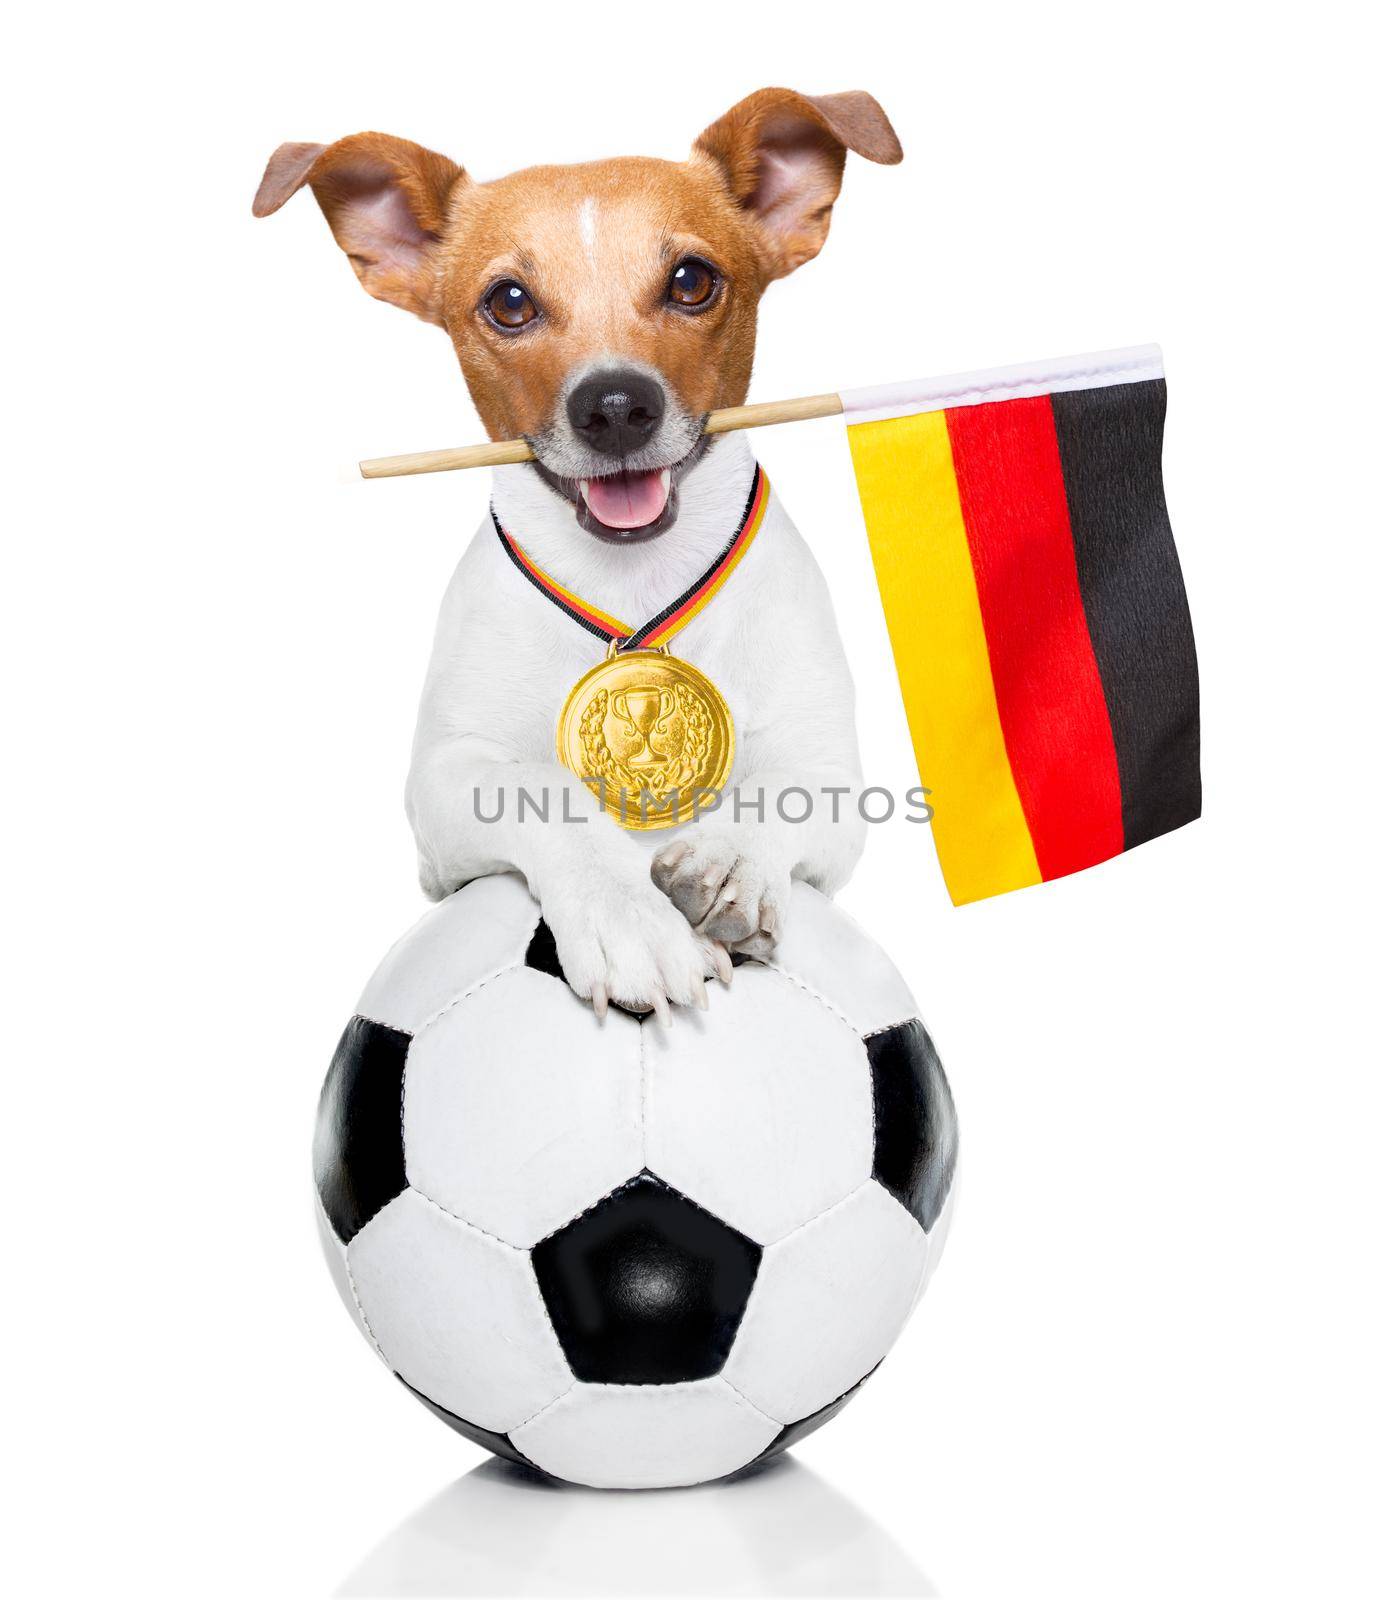 soccer jack russell dog by Brosch